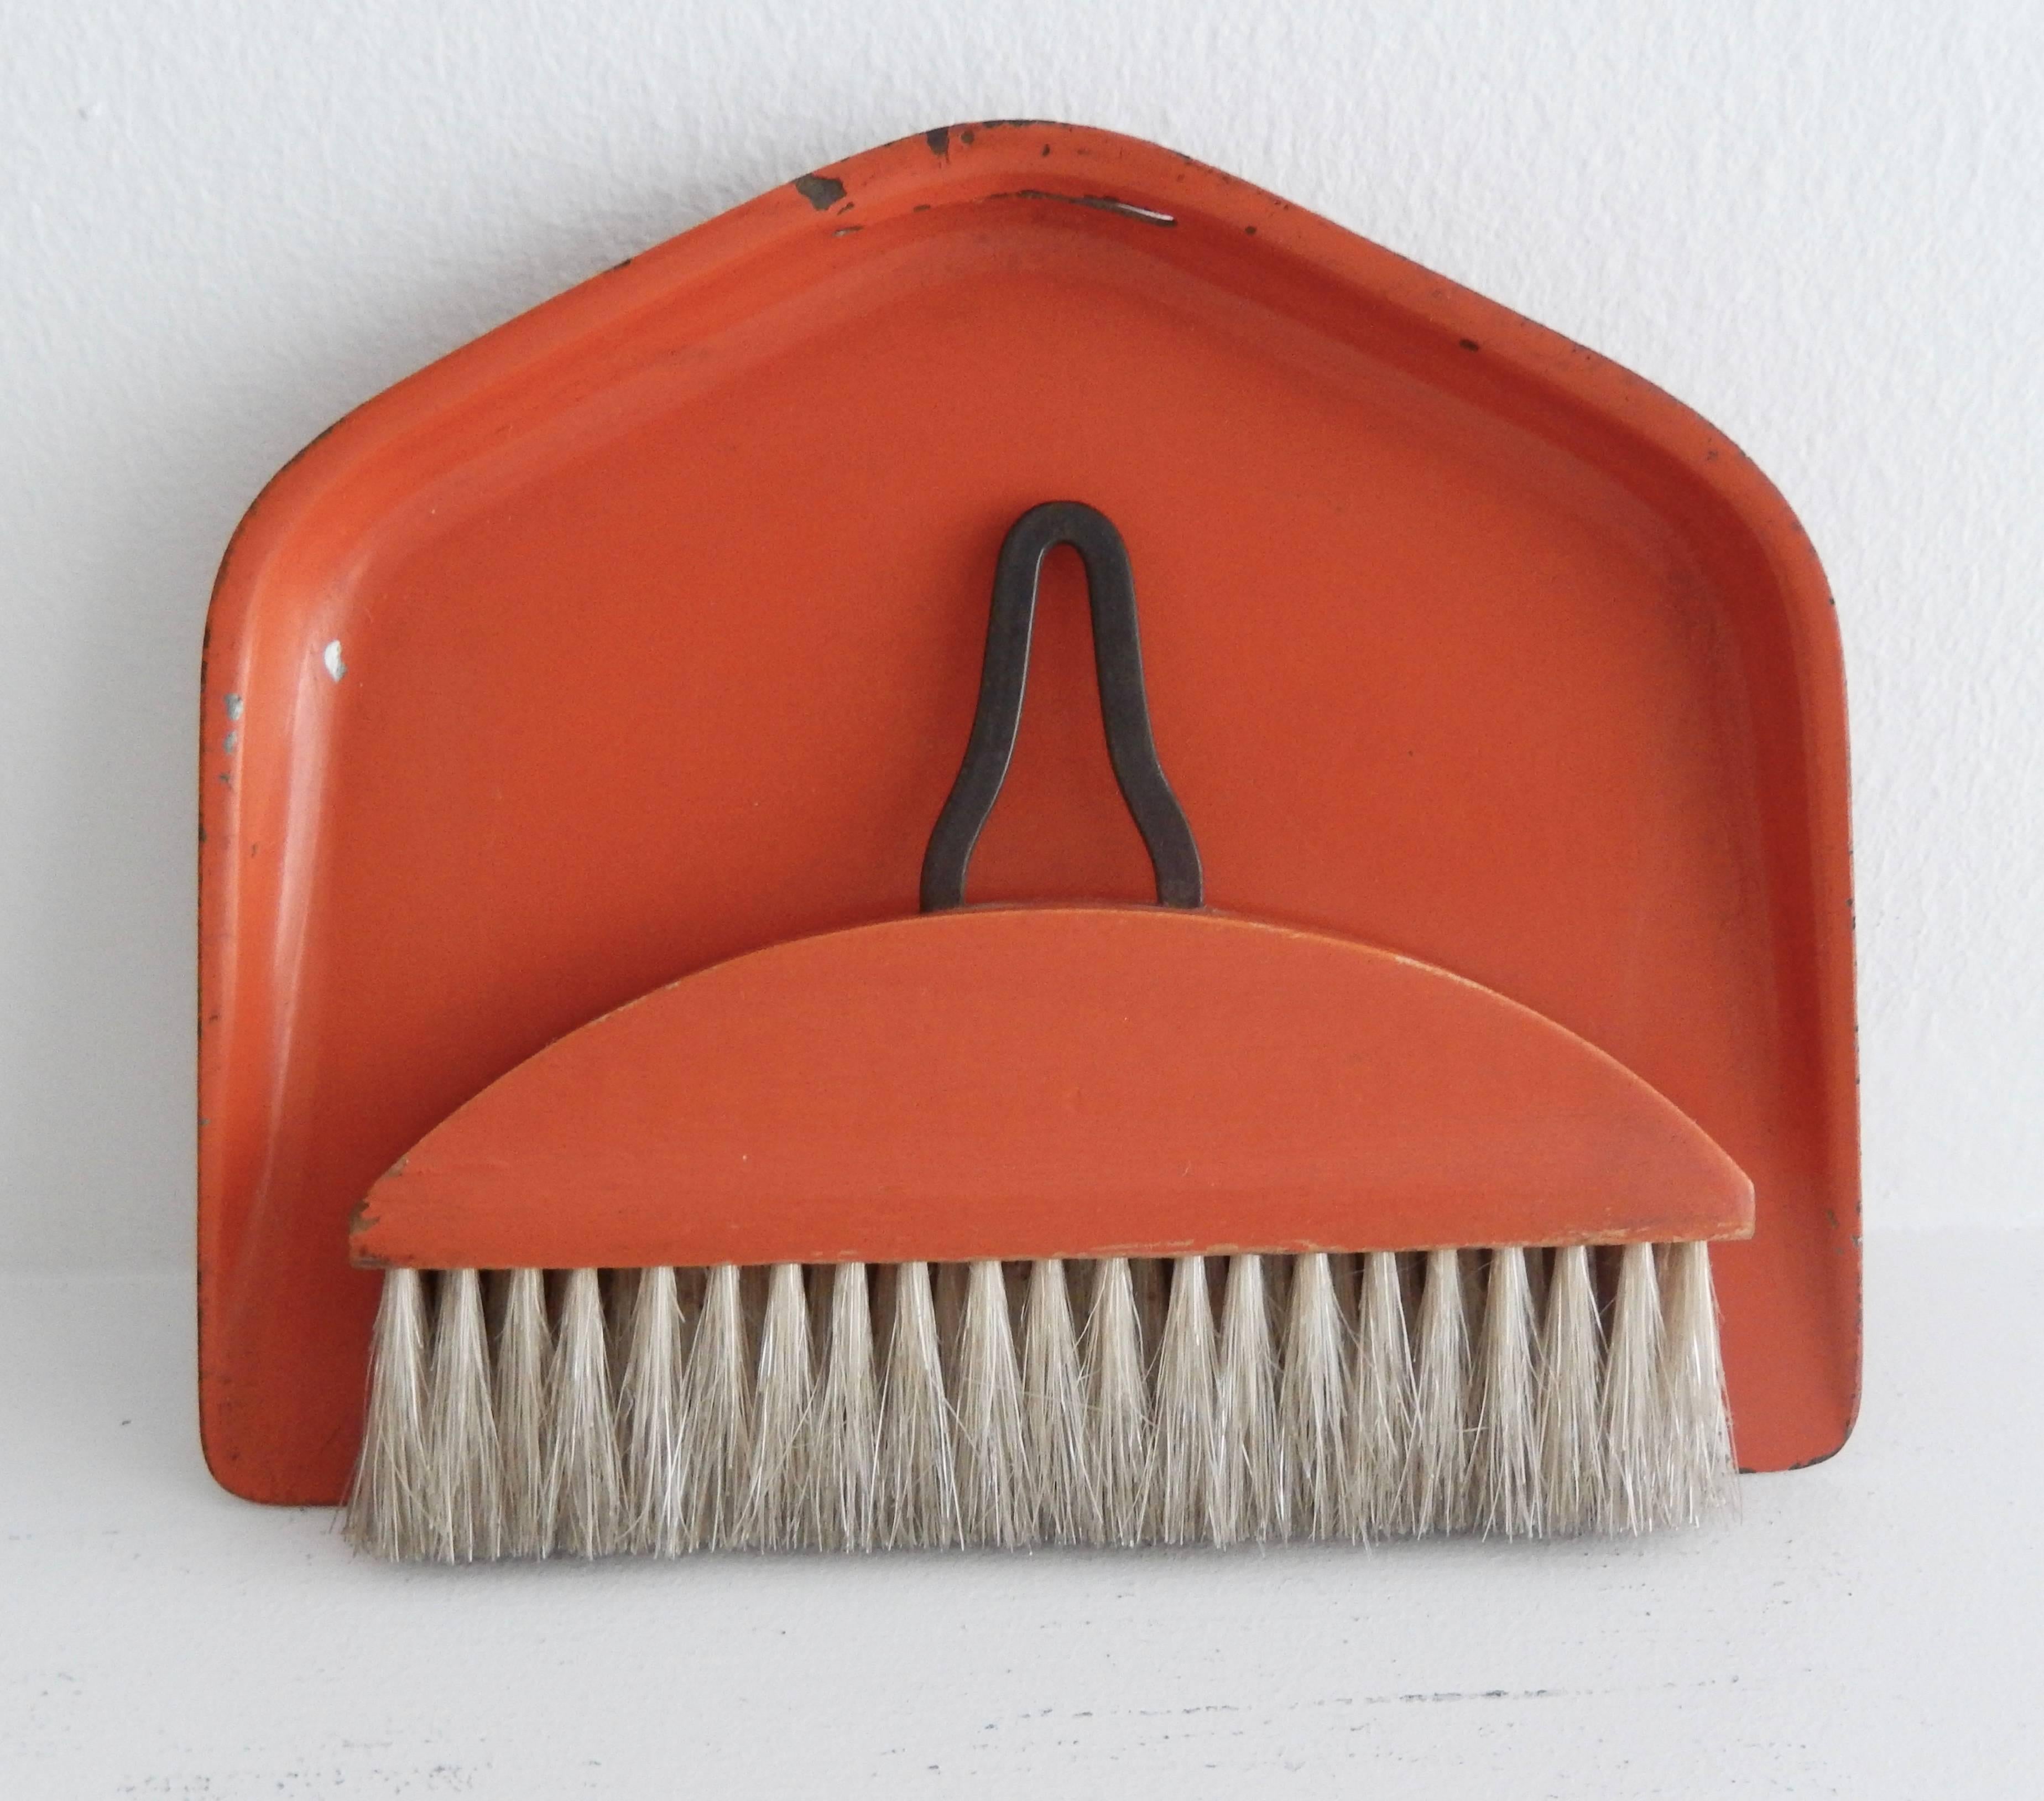 Bauhaus/Marianne Brandt Modernist Crumb Brush and Tray, circa 1929 In Good Condition For Sale In Winnetka, IL